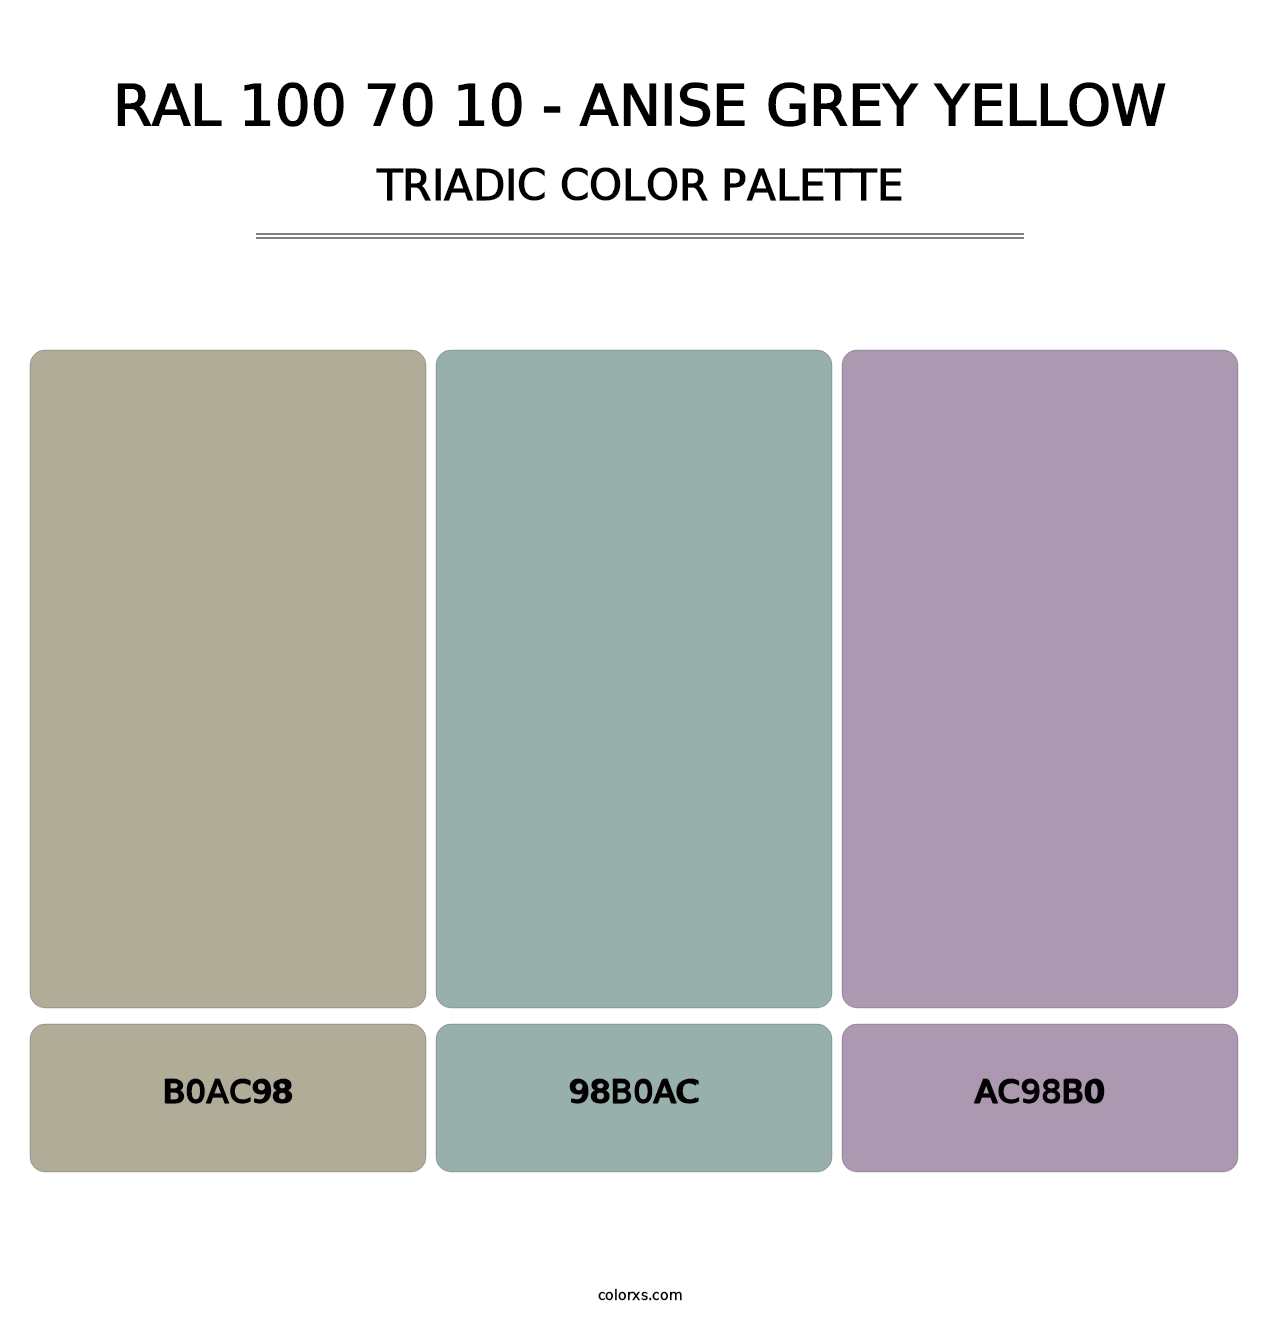 RAL 100 70 10 - Anise Grey Yellow - Triadic Color Palette